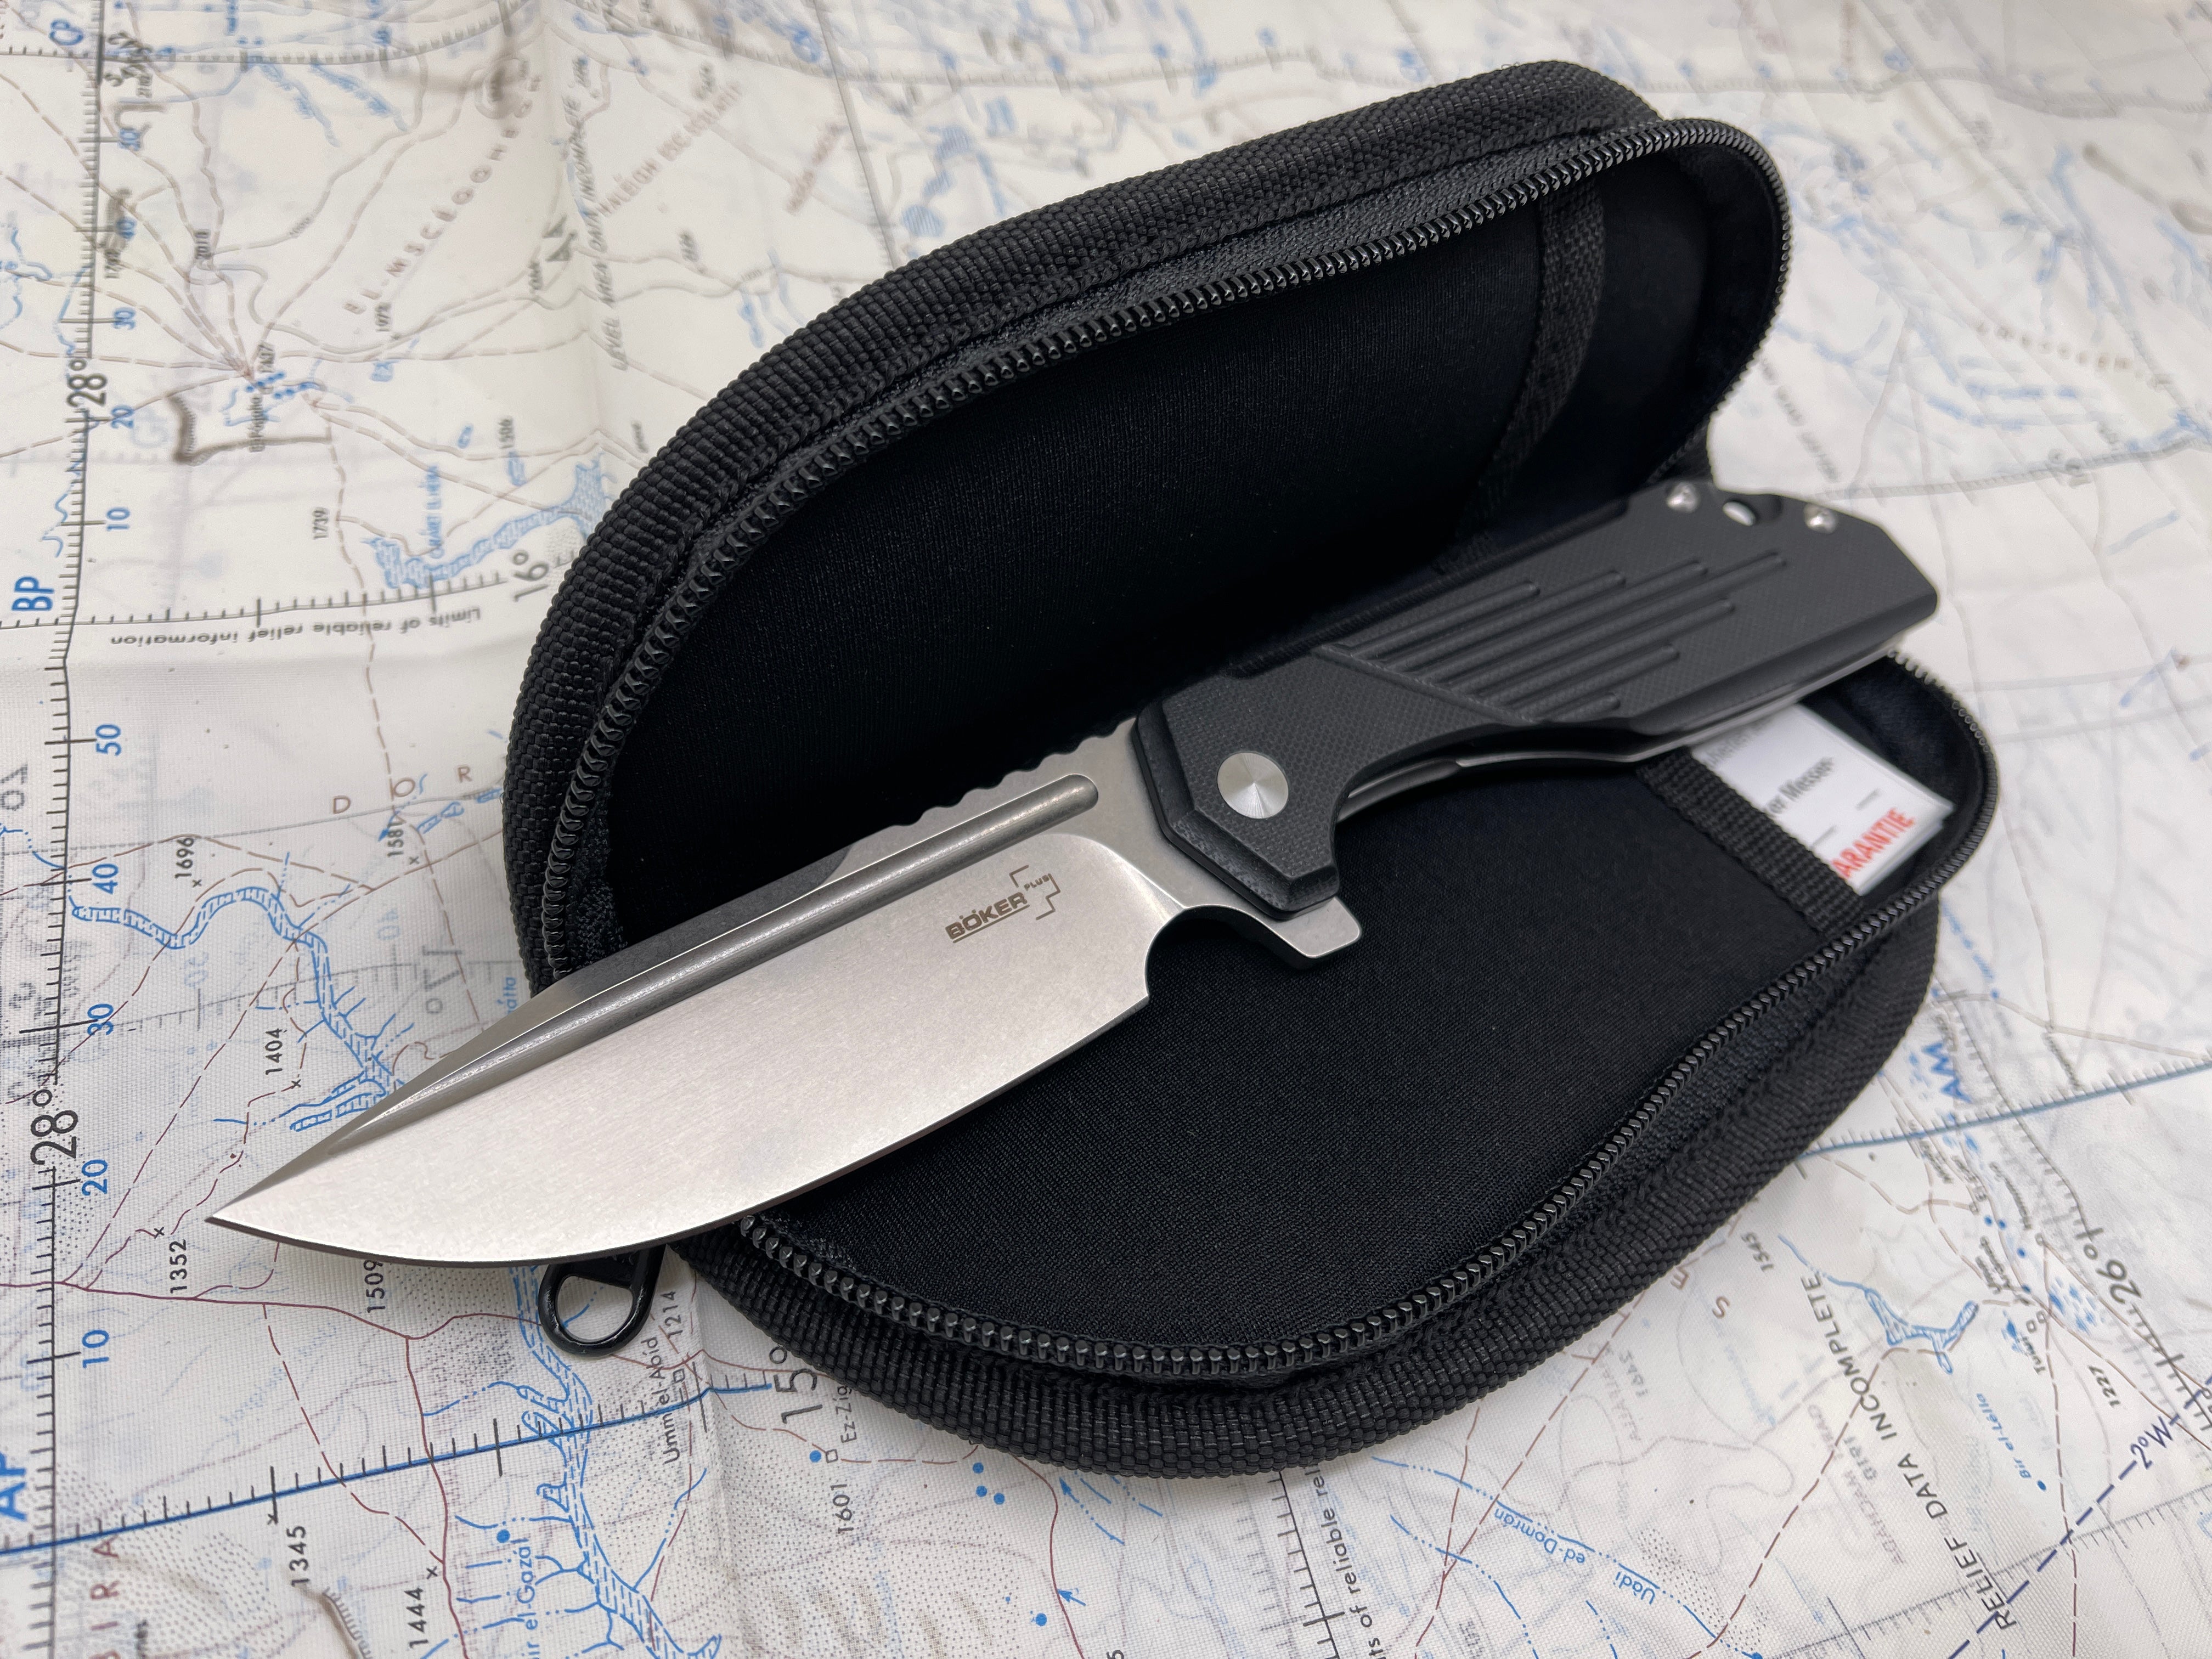 Onyx G10 - Boker Stout Commander Combo + With Knife Taco!